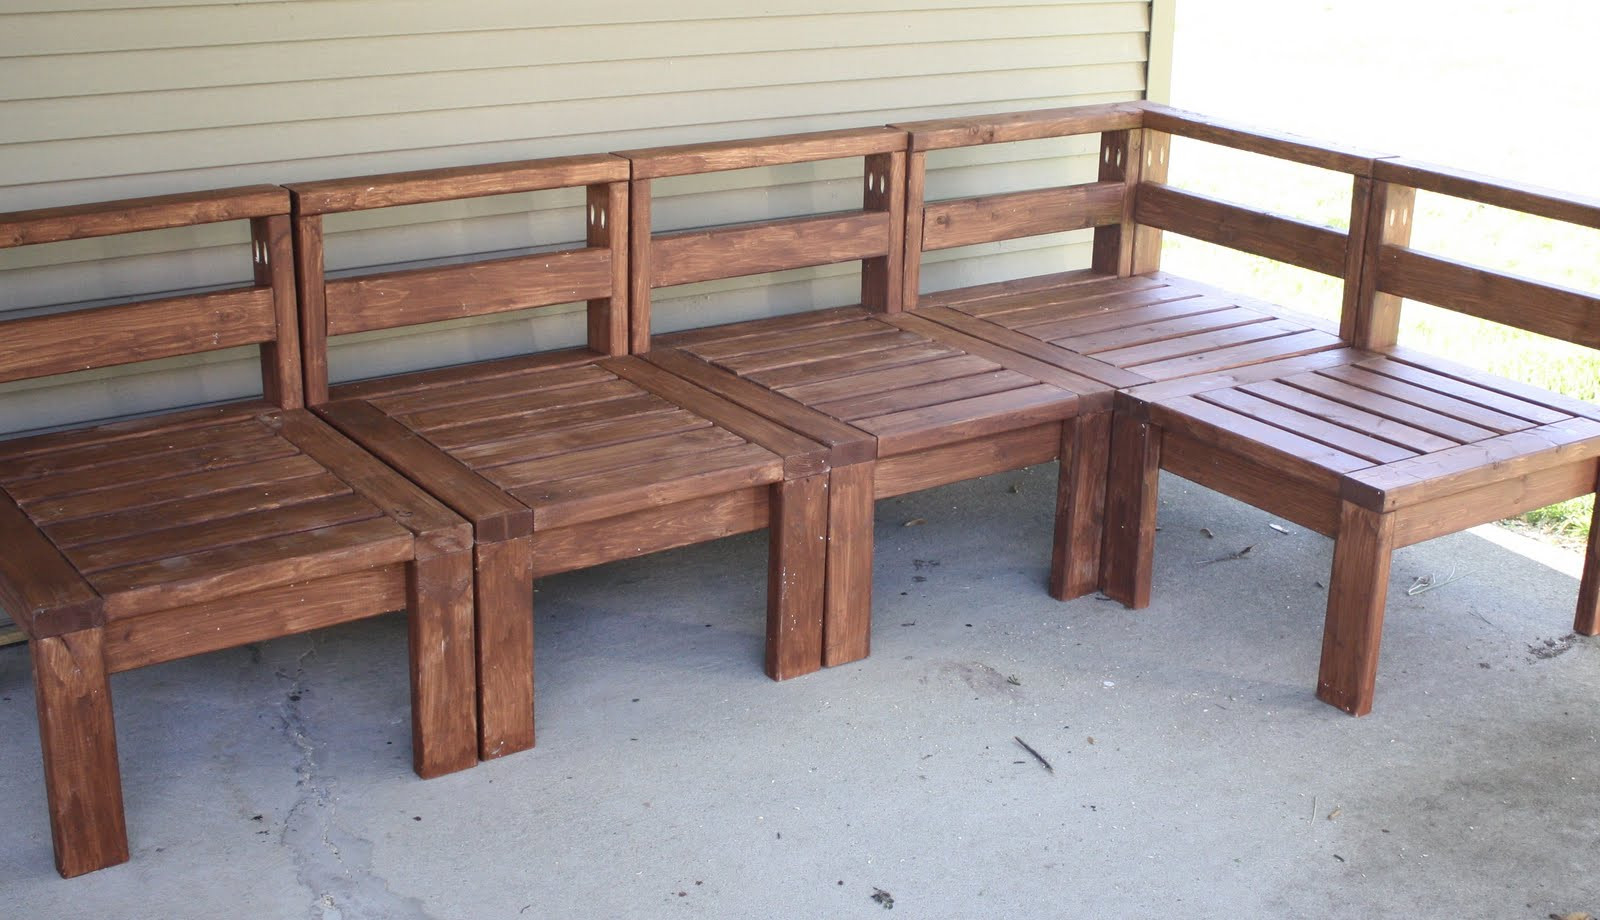 DIY Outdoor Sectional Plans
 More Like Home 2x4 Outdoor Sectional